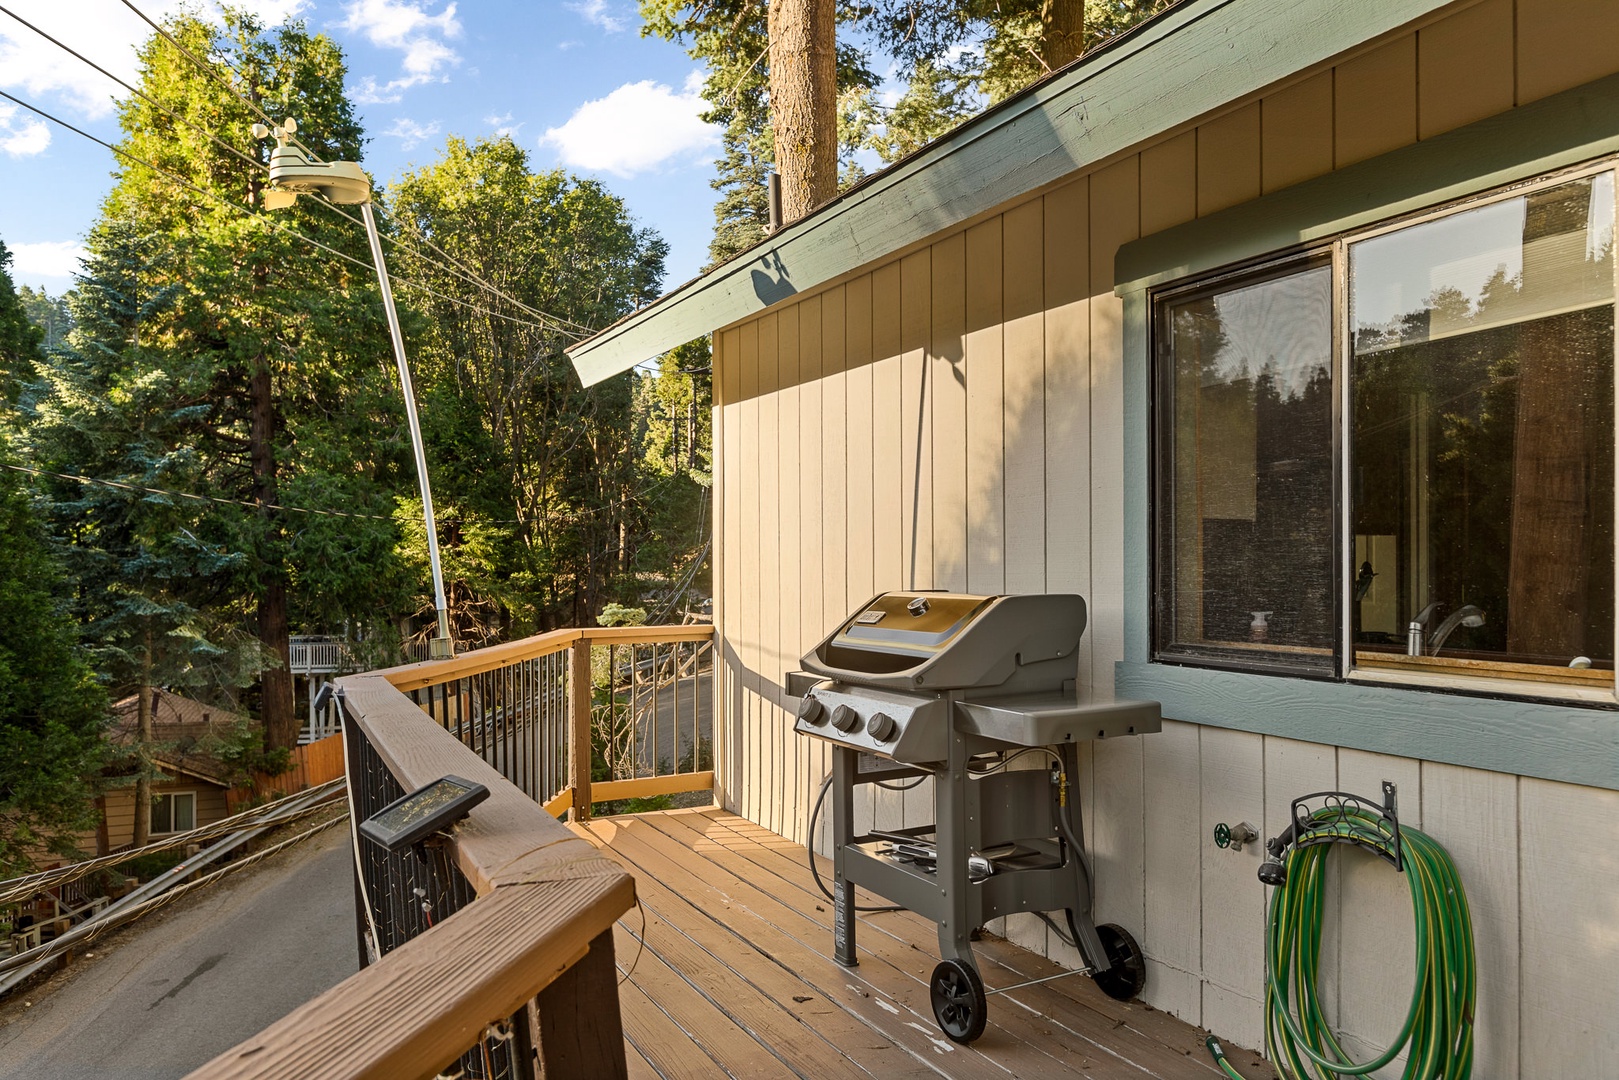 Head out to the sunny back deck to grill up a feast!